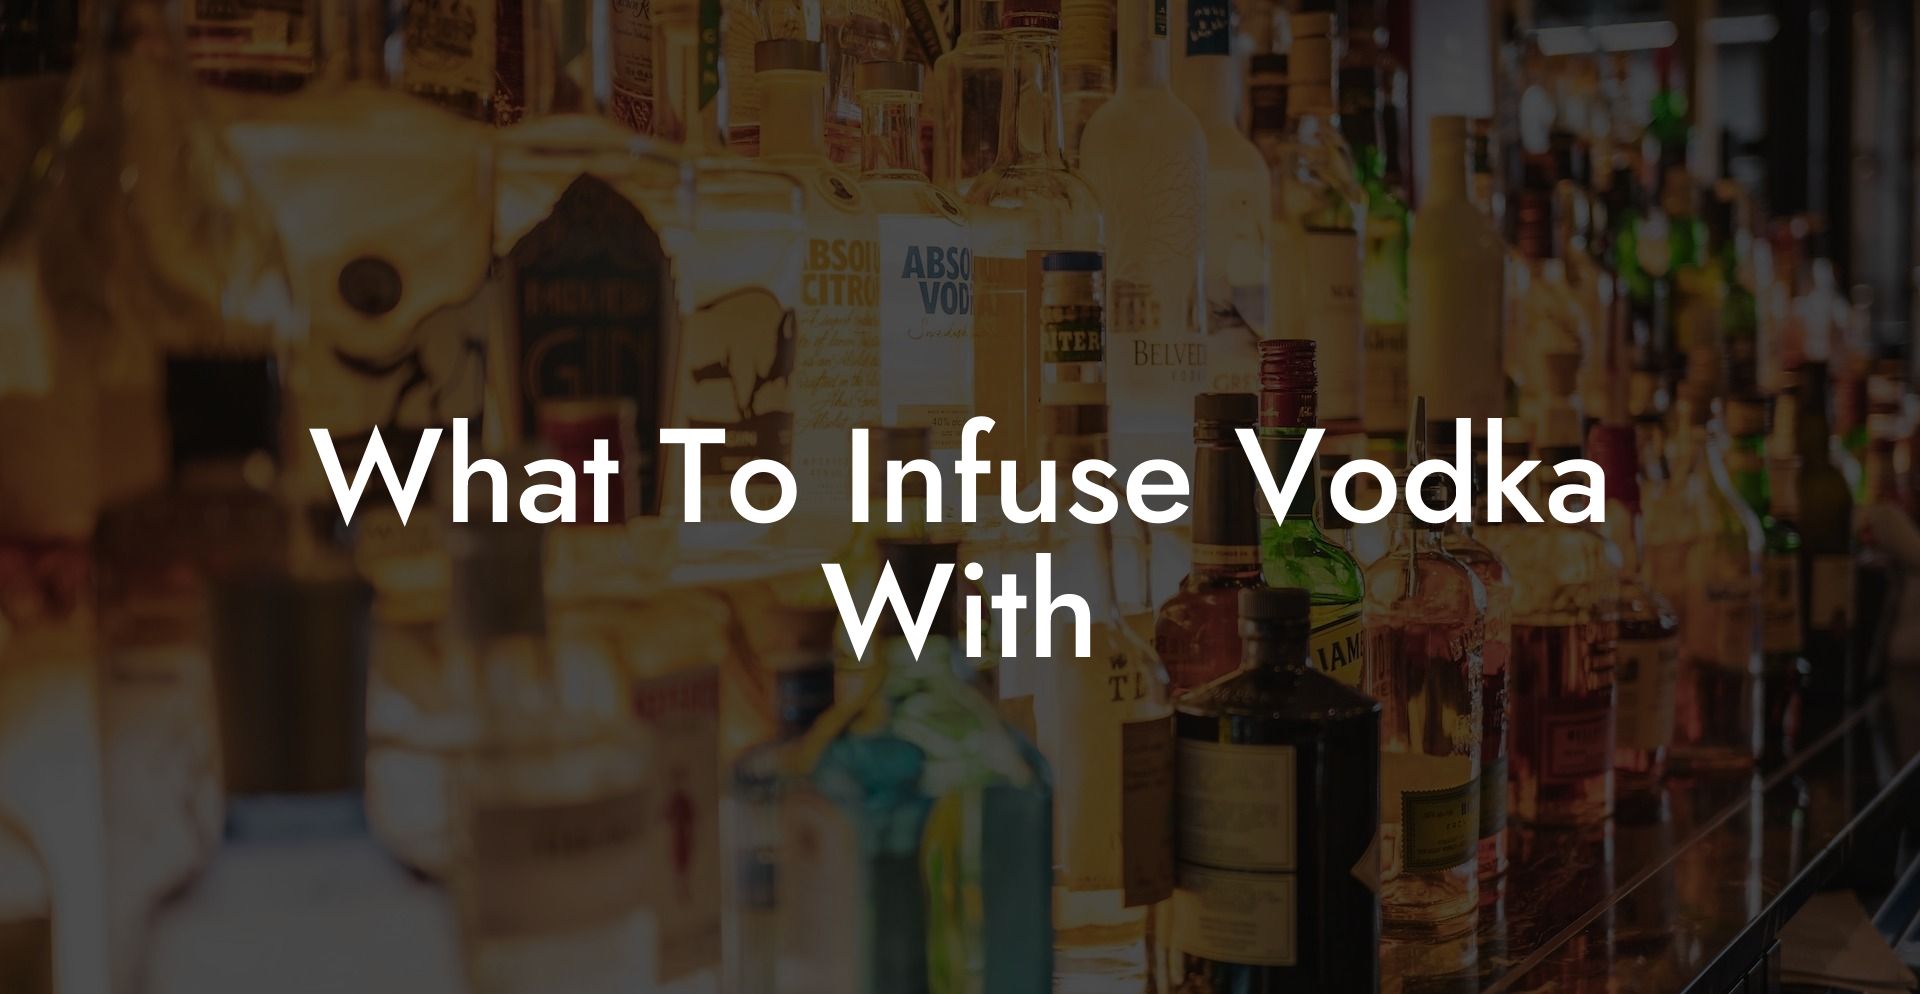 What To Infuse Vodka With